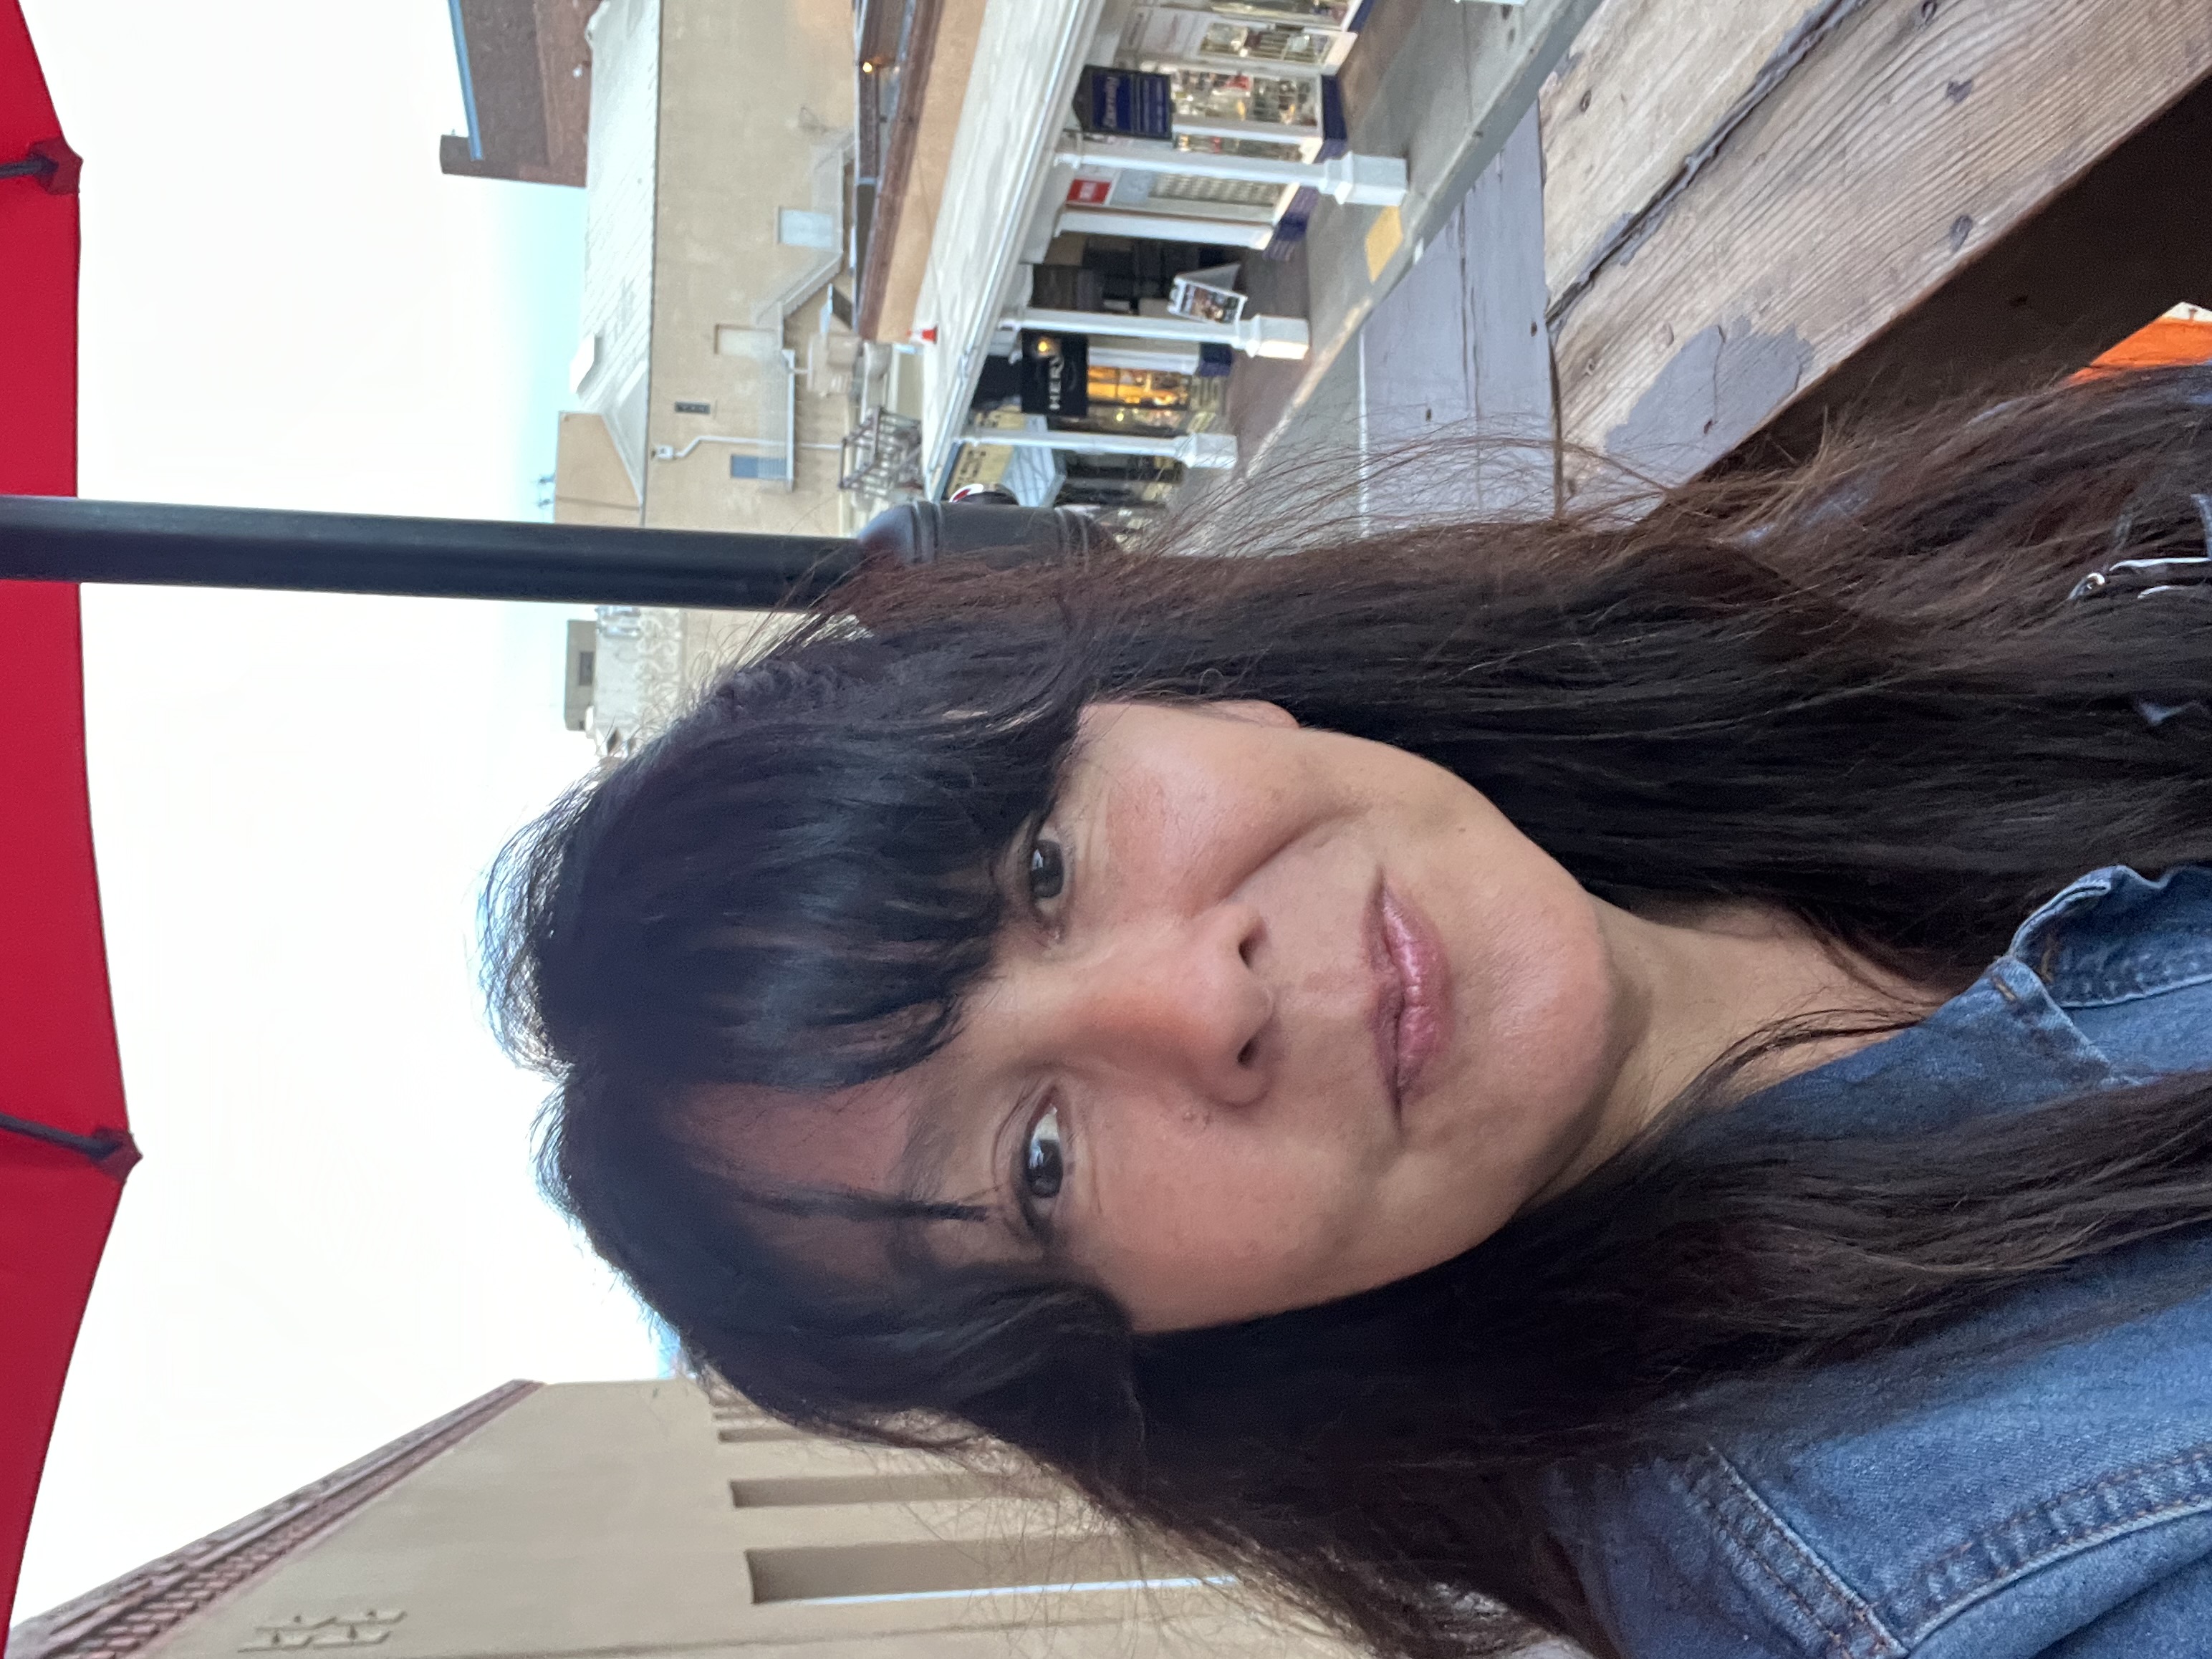 Deborah Taffa in Santa Fe, NM, America's oldest capital and the ancestral homeland of the Keres and Tanoan Nations